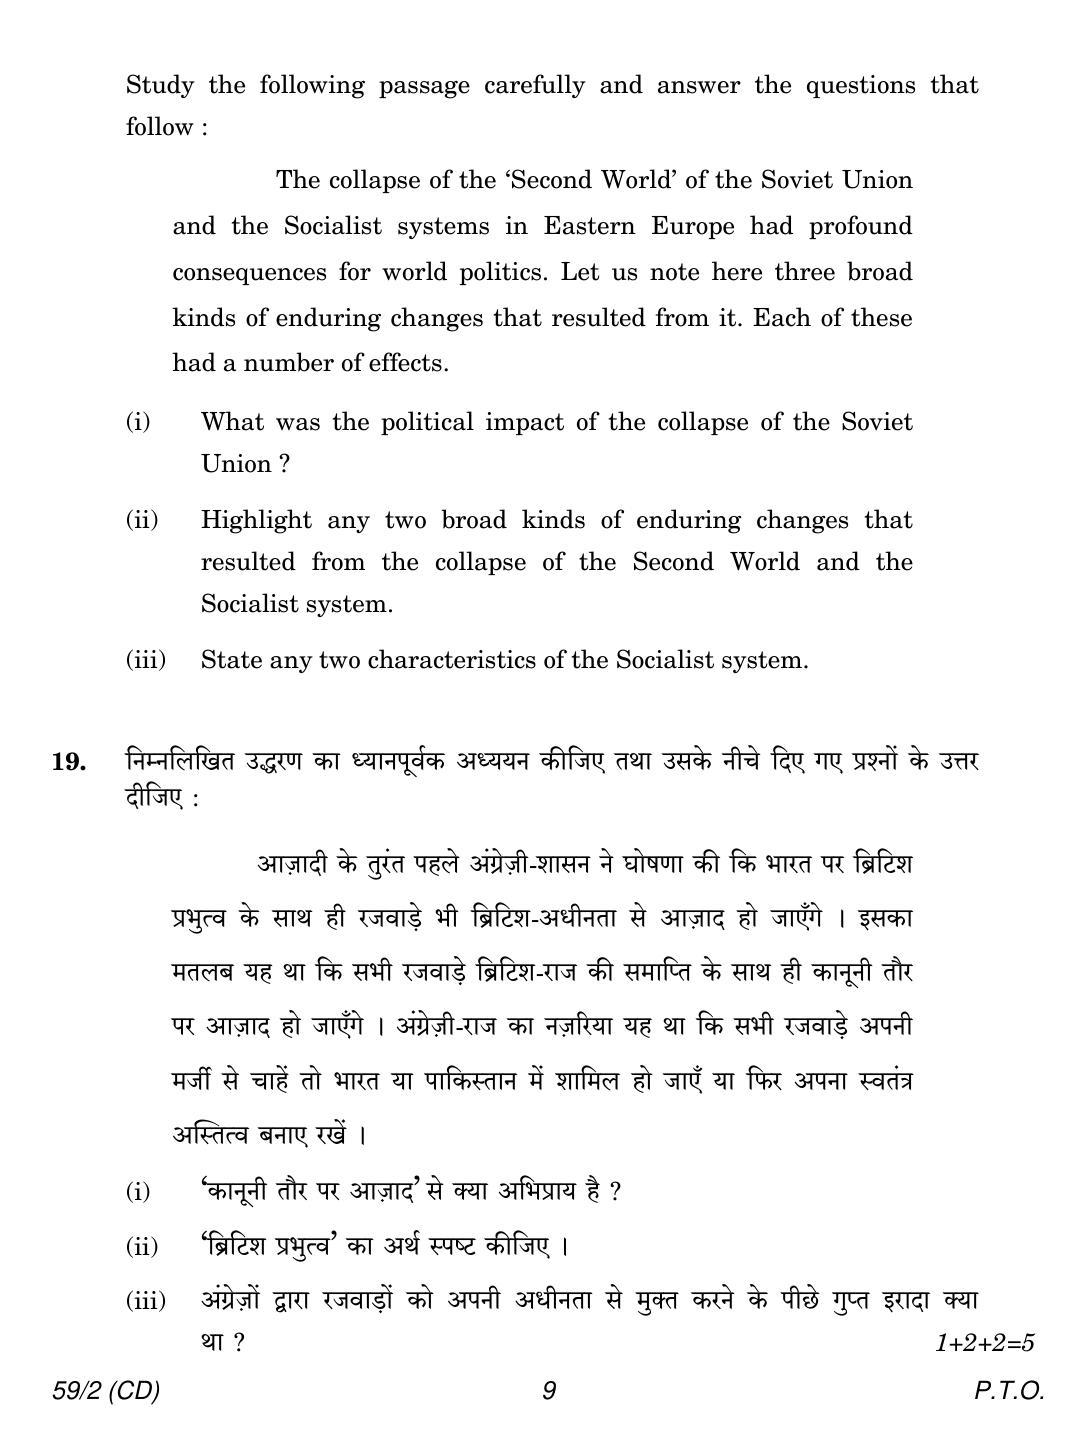 CBSE Class 12 59-2 POLITICAL SCIENCE CD 2018 Question Paper - Page 9